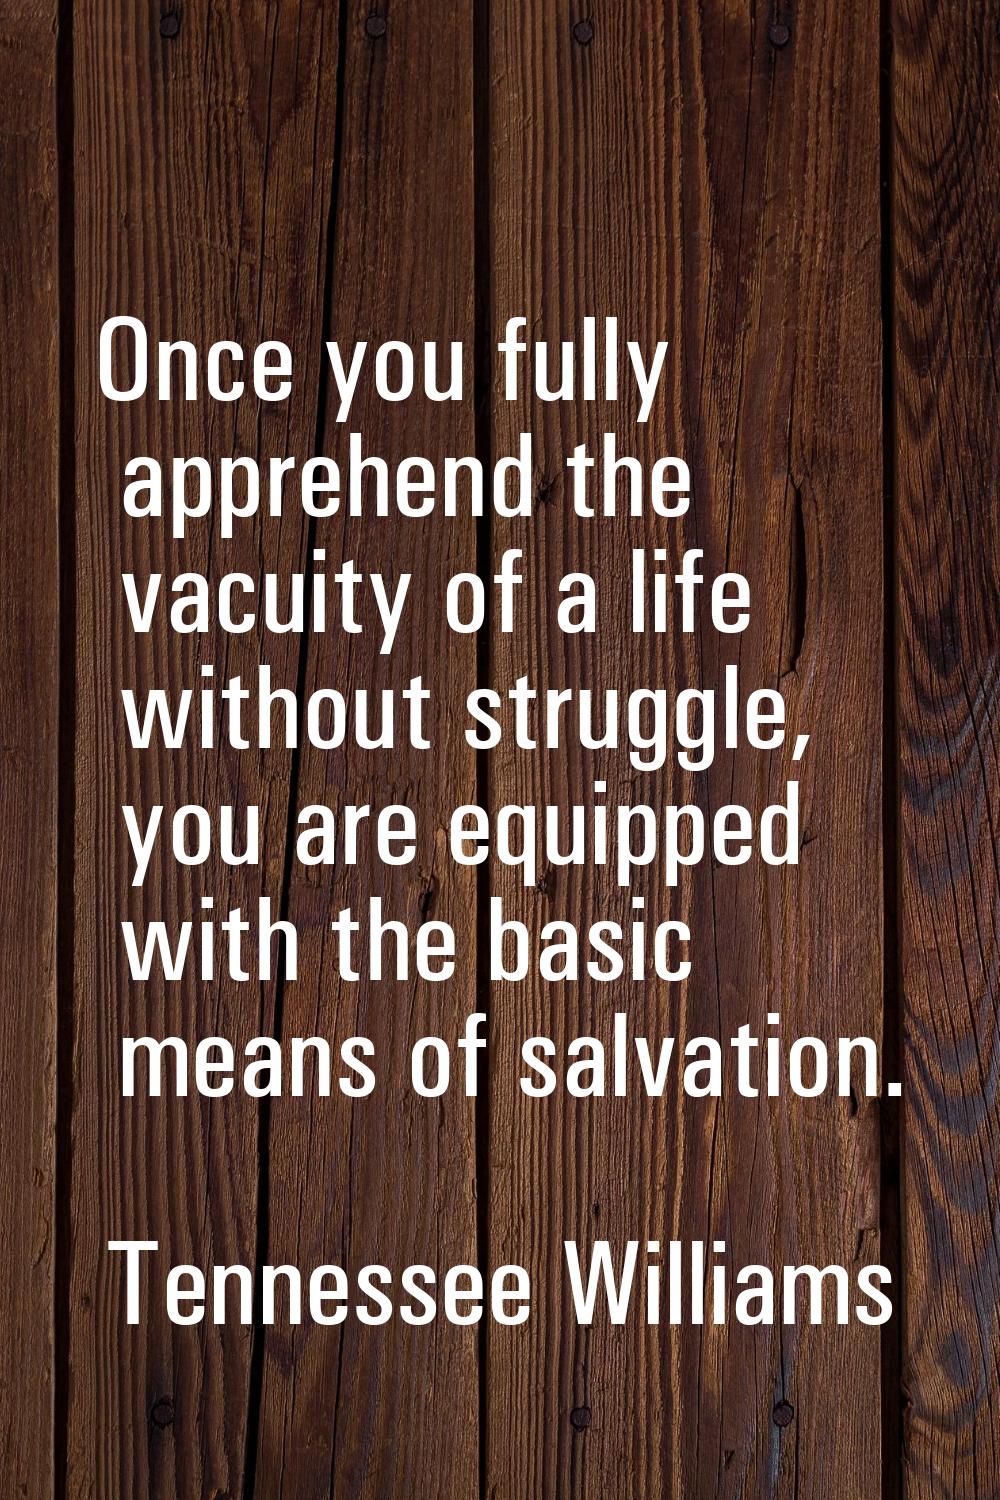 Once you fully apprehend the vacuity of a life without struggle, you are equipped with the basic me